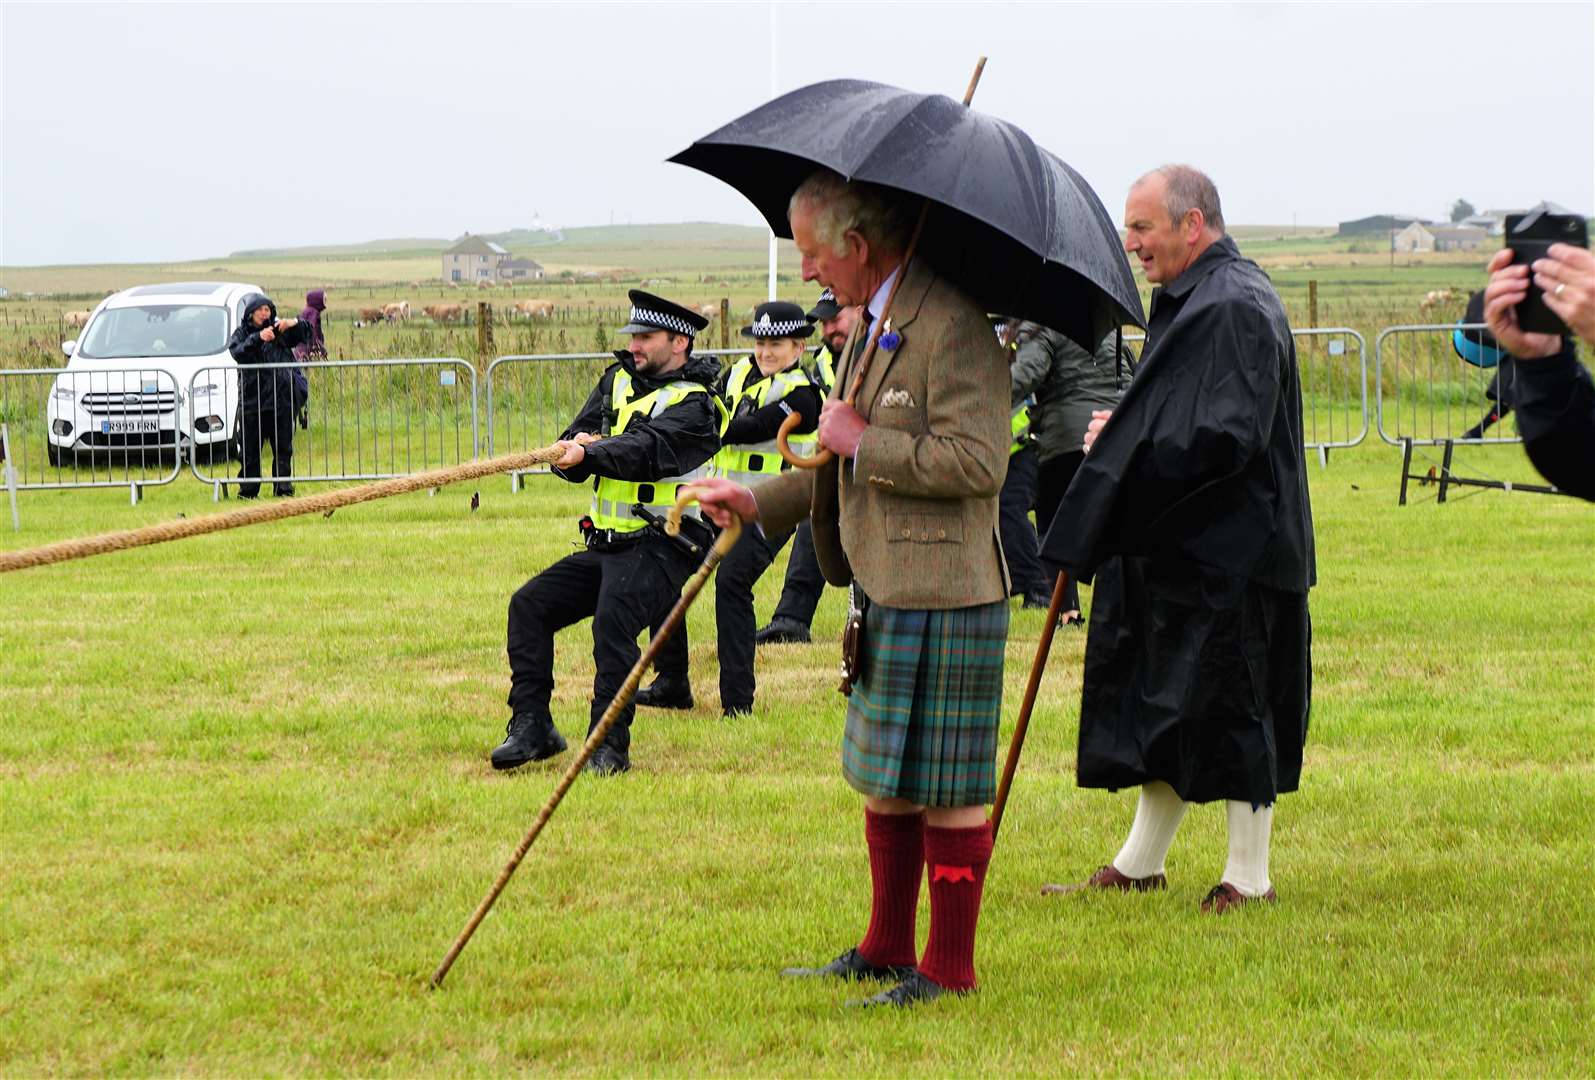 The prince adjudicated at the tug of war between Wounded Highlanders and the police team. Picture: DGS